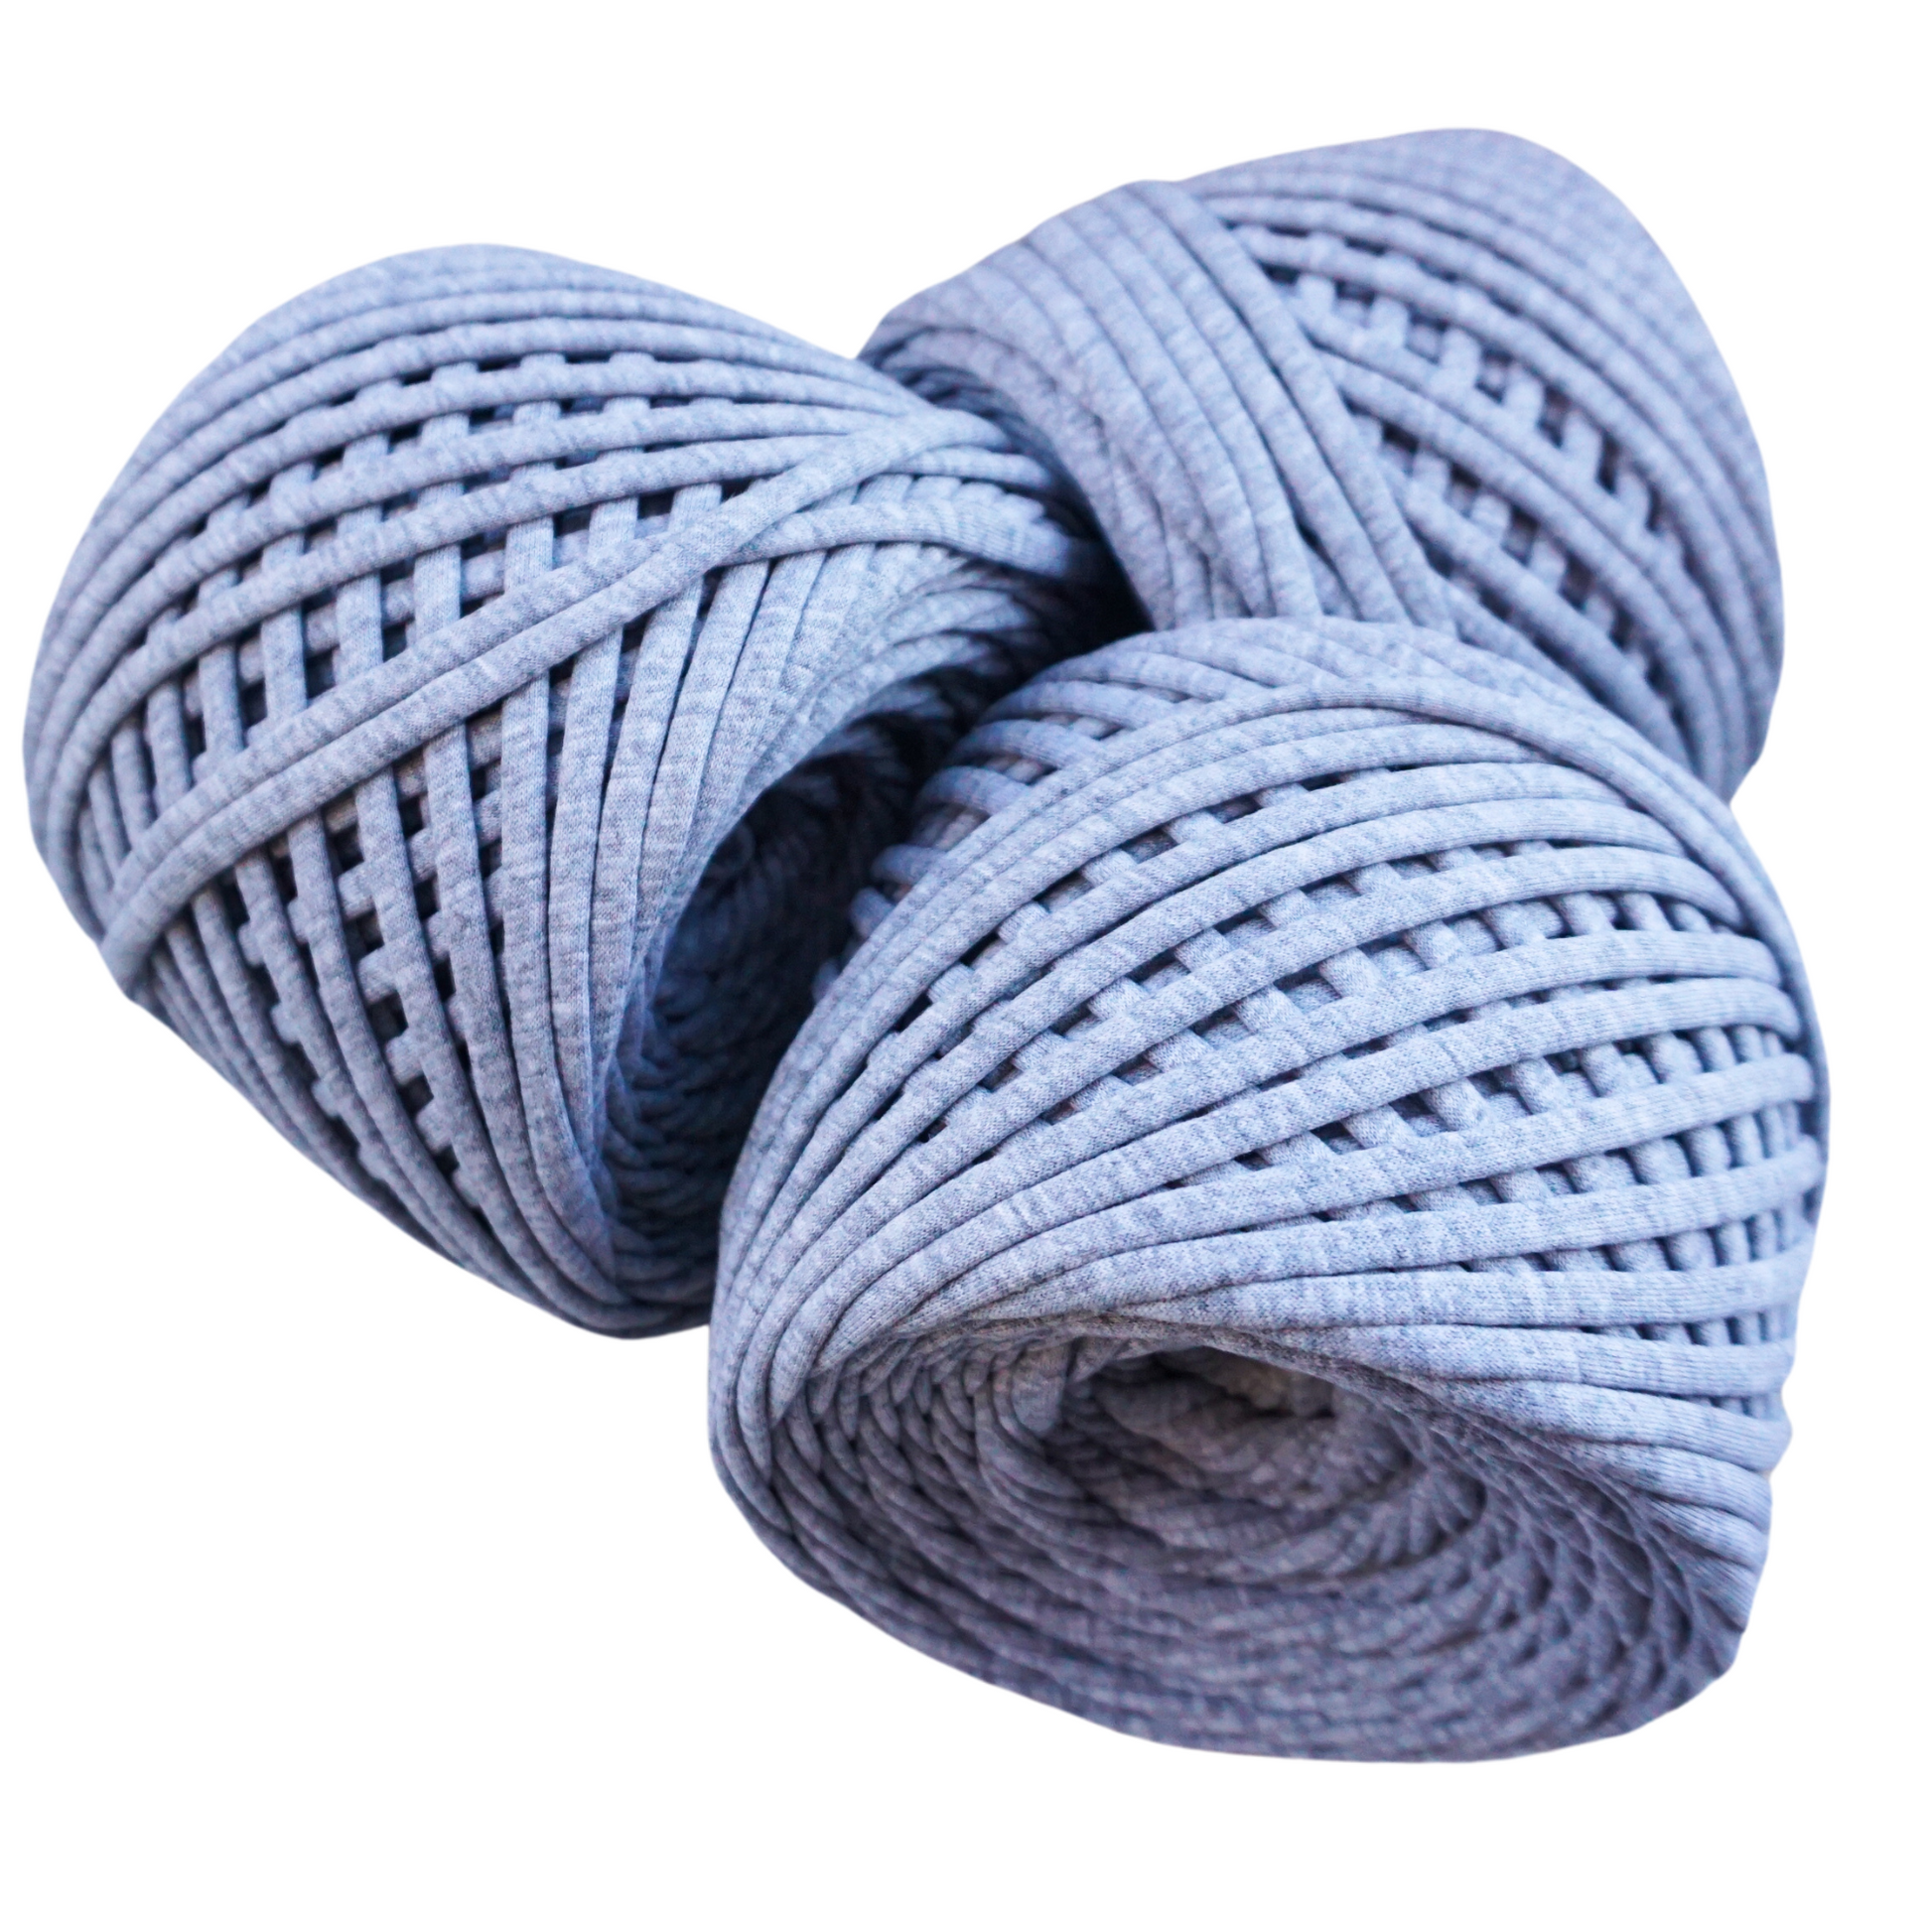 T-shirt yarn for crocheting baskets, bags, rugs and home decor. Jersey –  Knitznpurlz